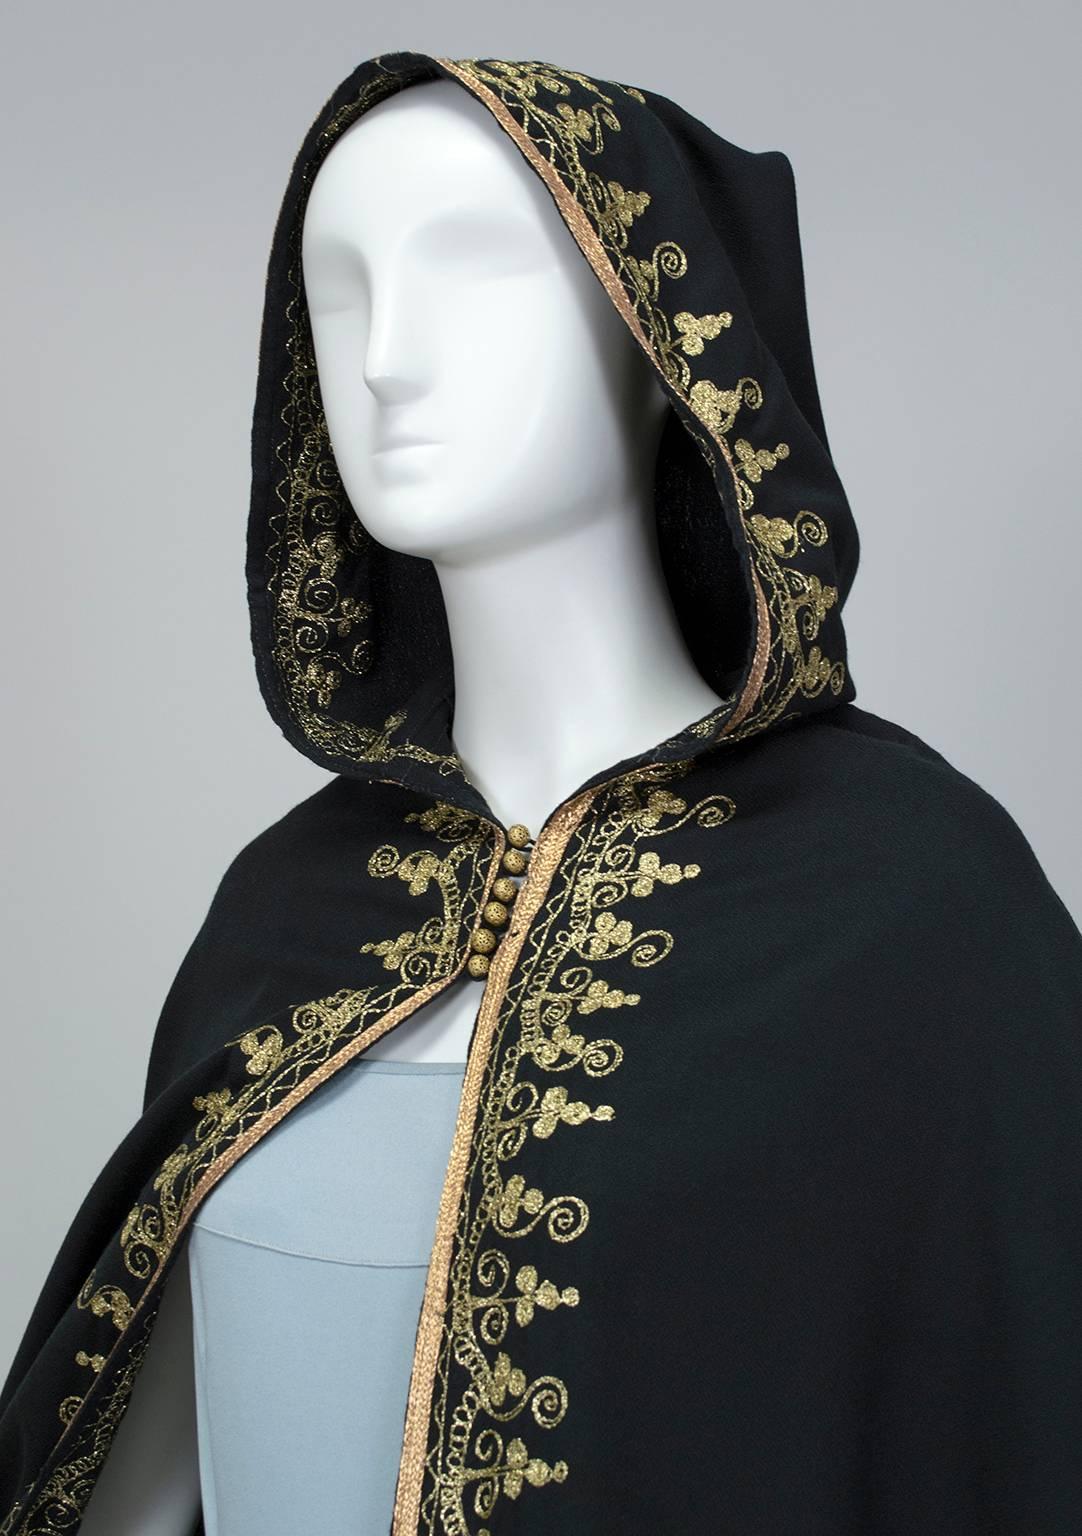 Black Moroccan Gold Embroidered Cloak with Tasseled Hood, 1960s